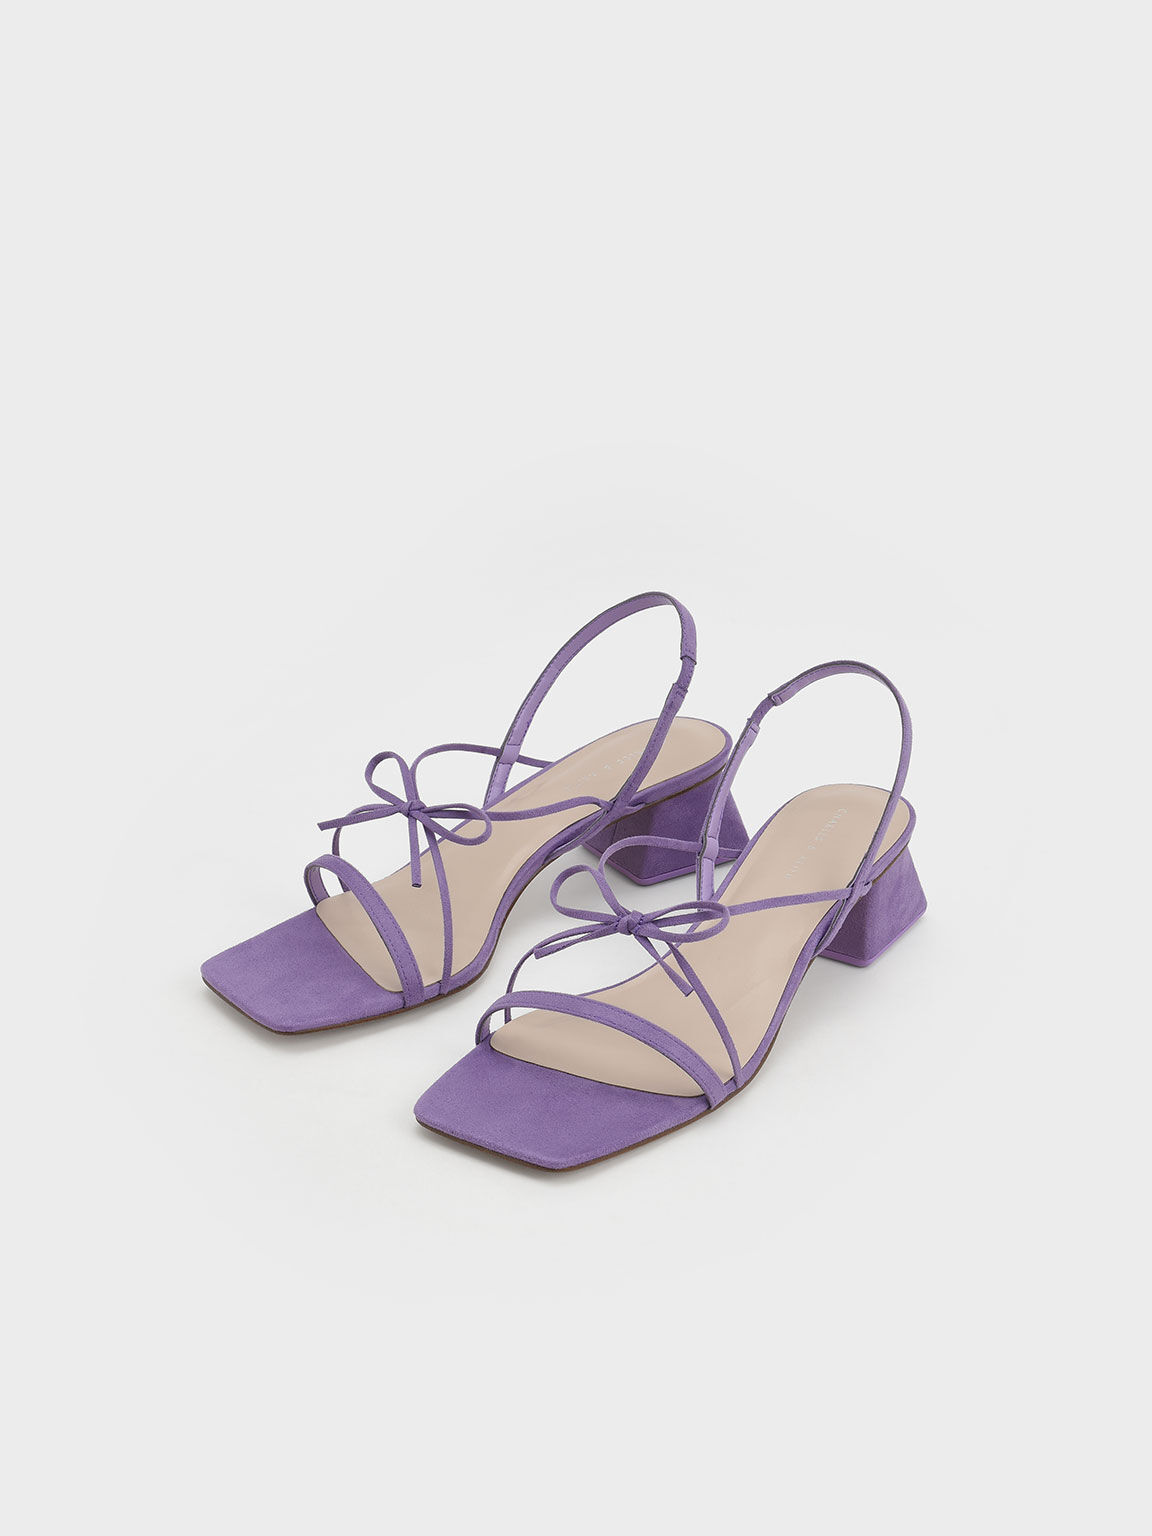 Sandal Strappy Bow Textured Slingback, Purple, hi-res